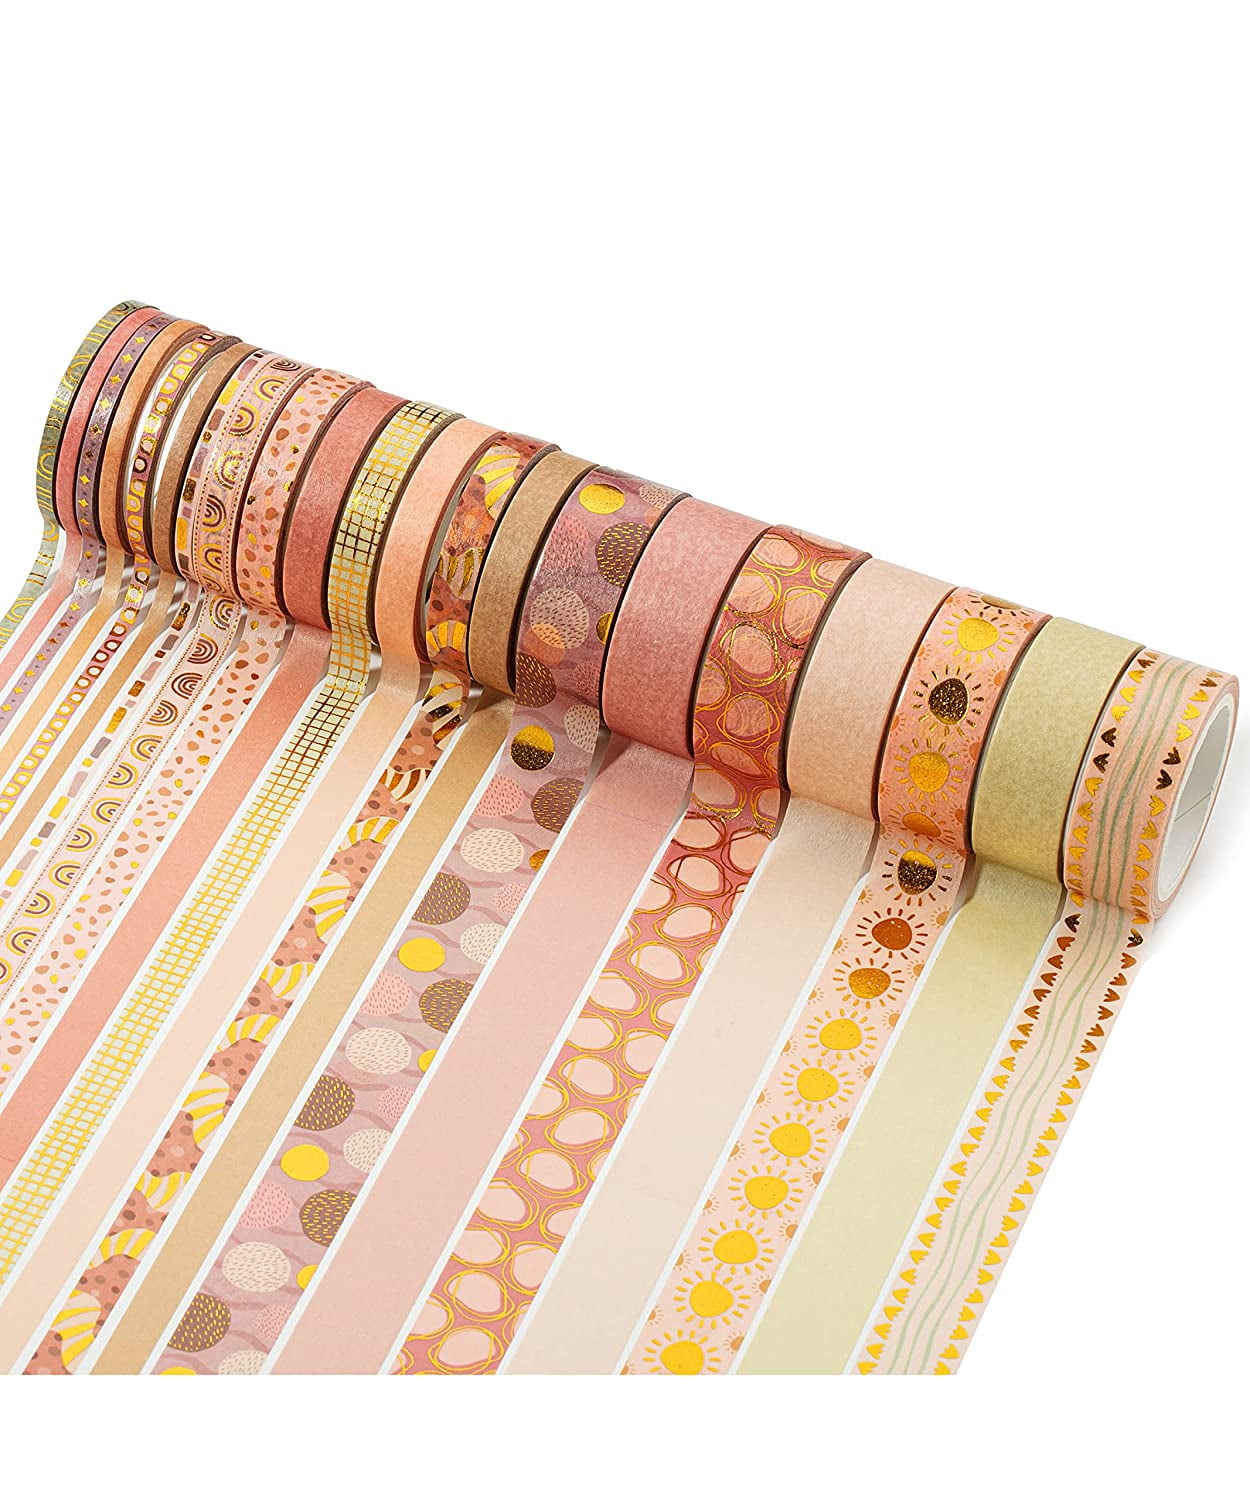 Boho Washi Tapes Cliparts By Mutchidesign